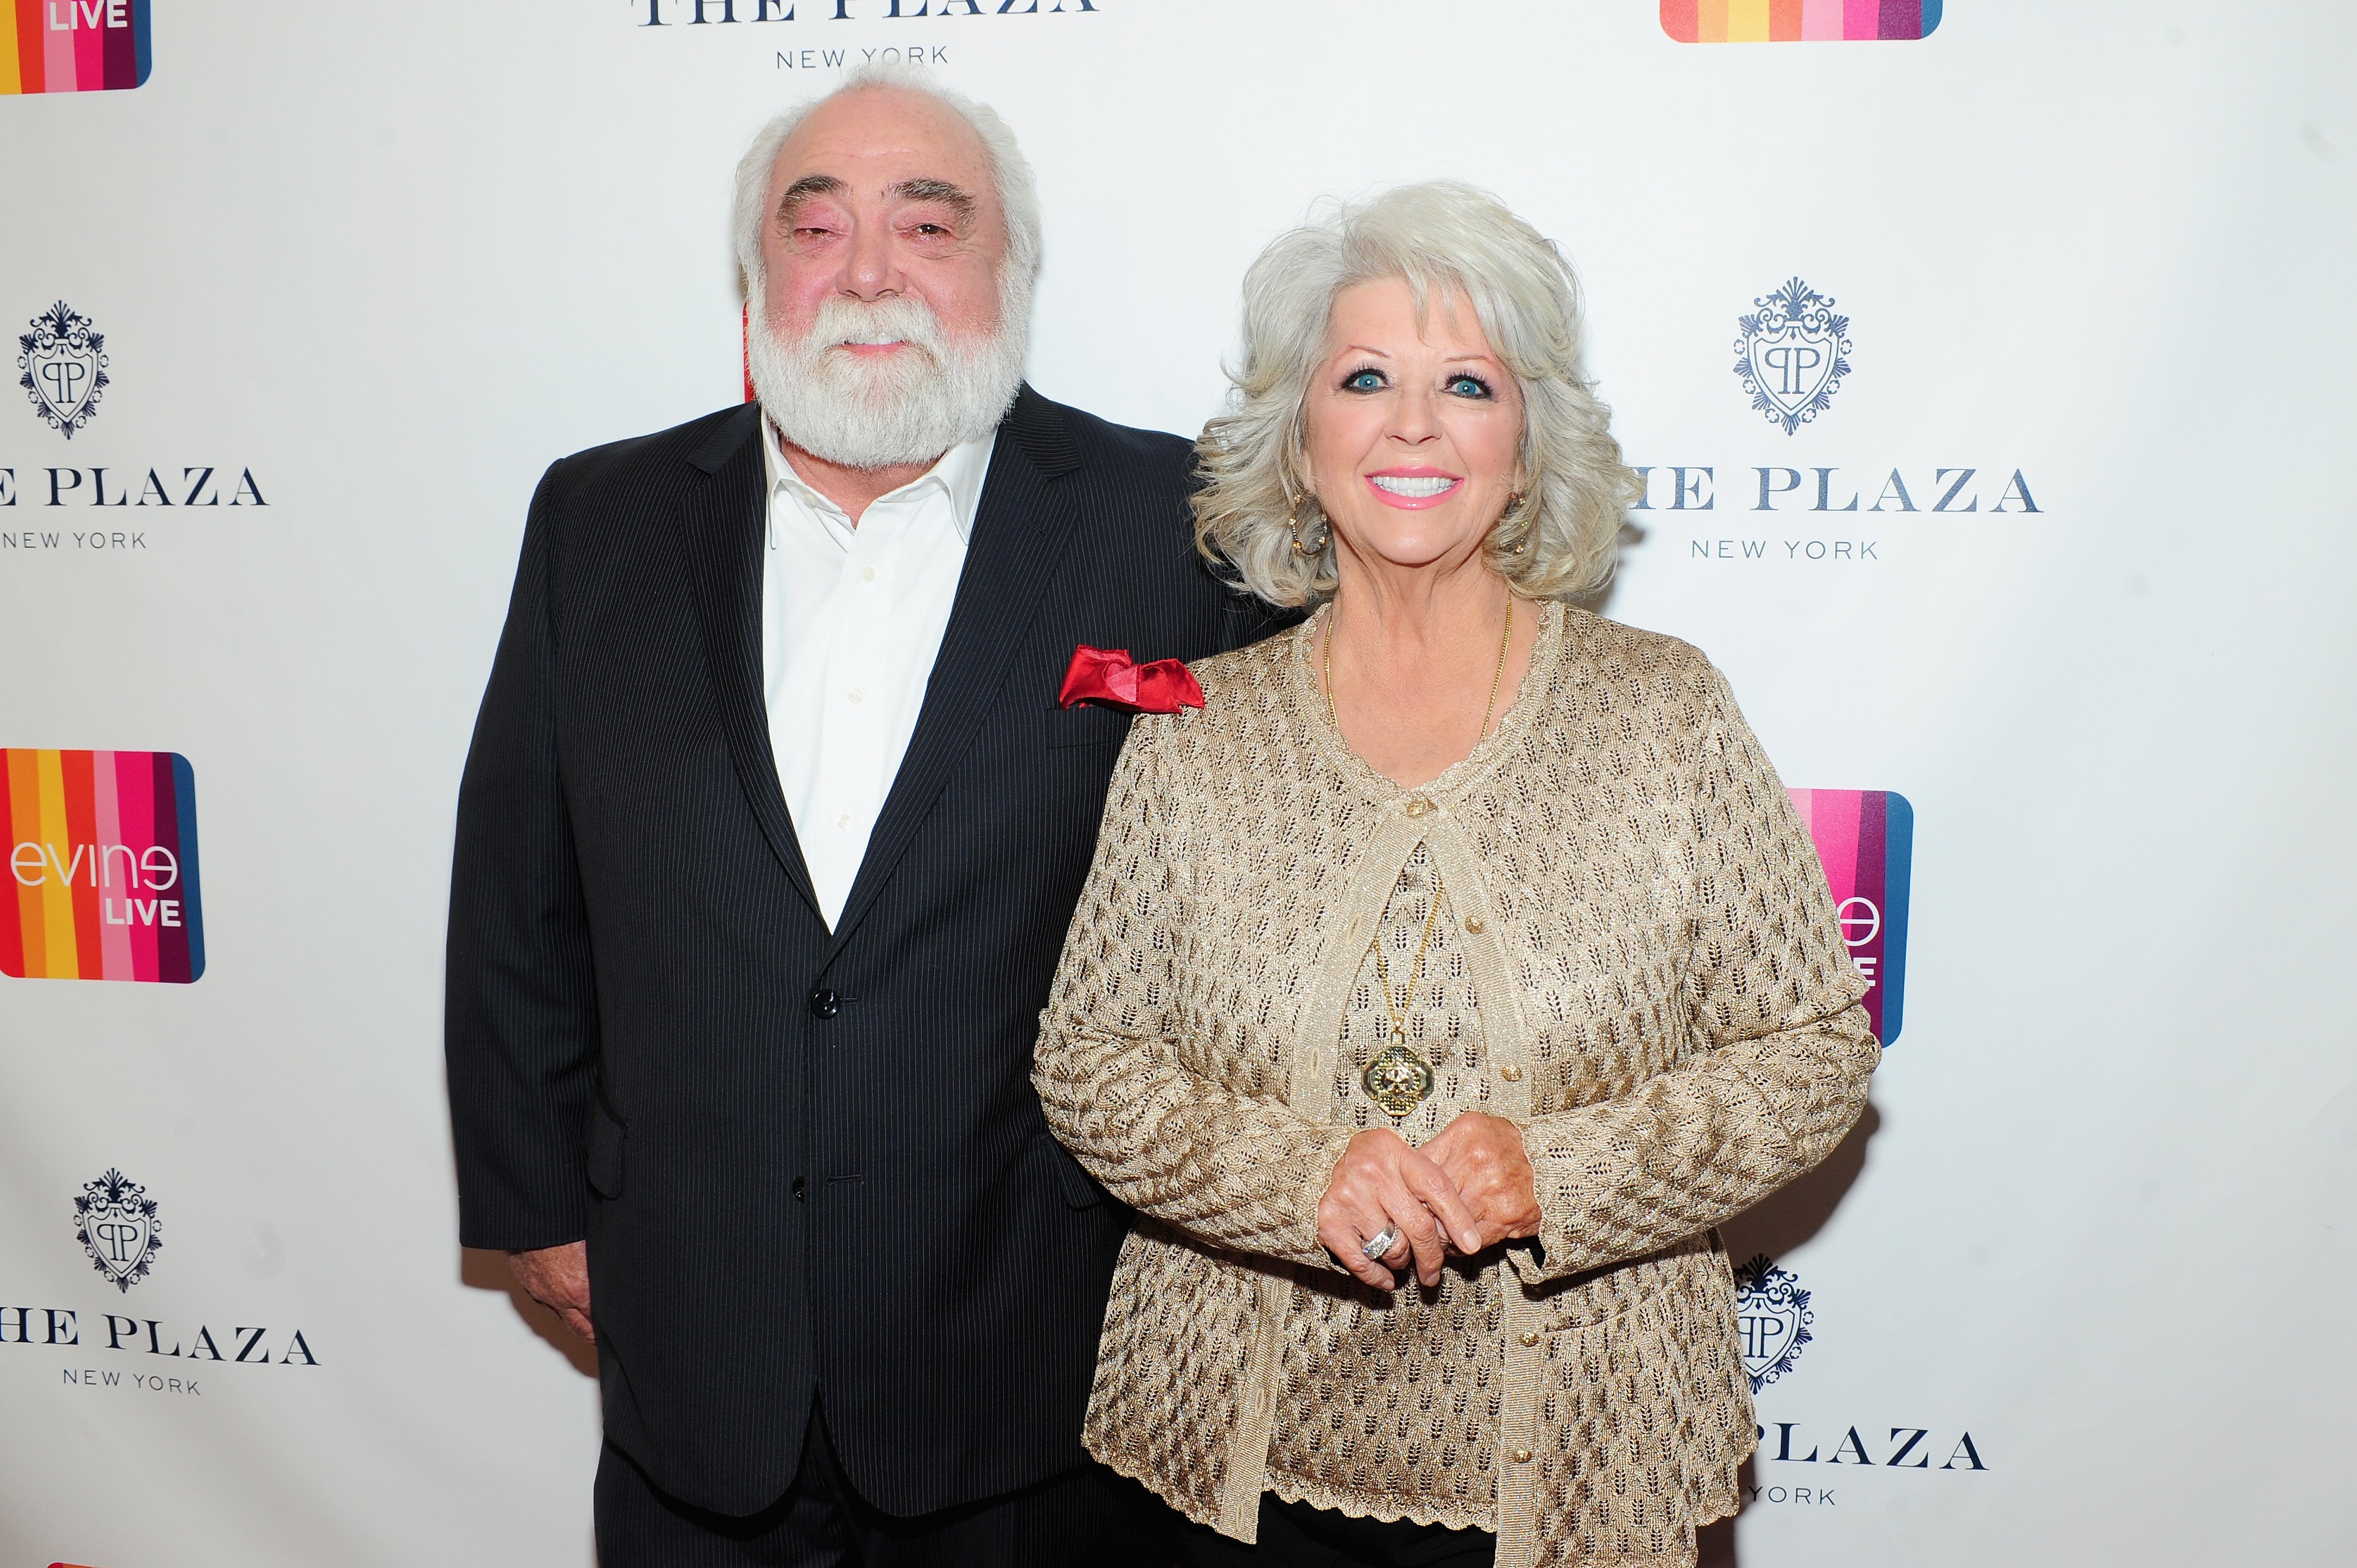 Michael Groover and chef Paula Deen attends EVINE Live launches new digital retail brand during live broadcast from The Plaza on February 14, 2015 in New York City. | Source: Getty Images